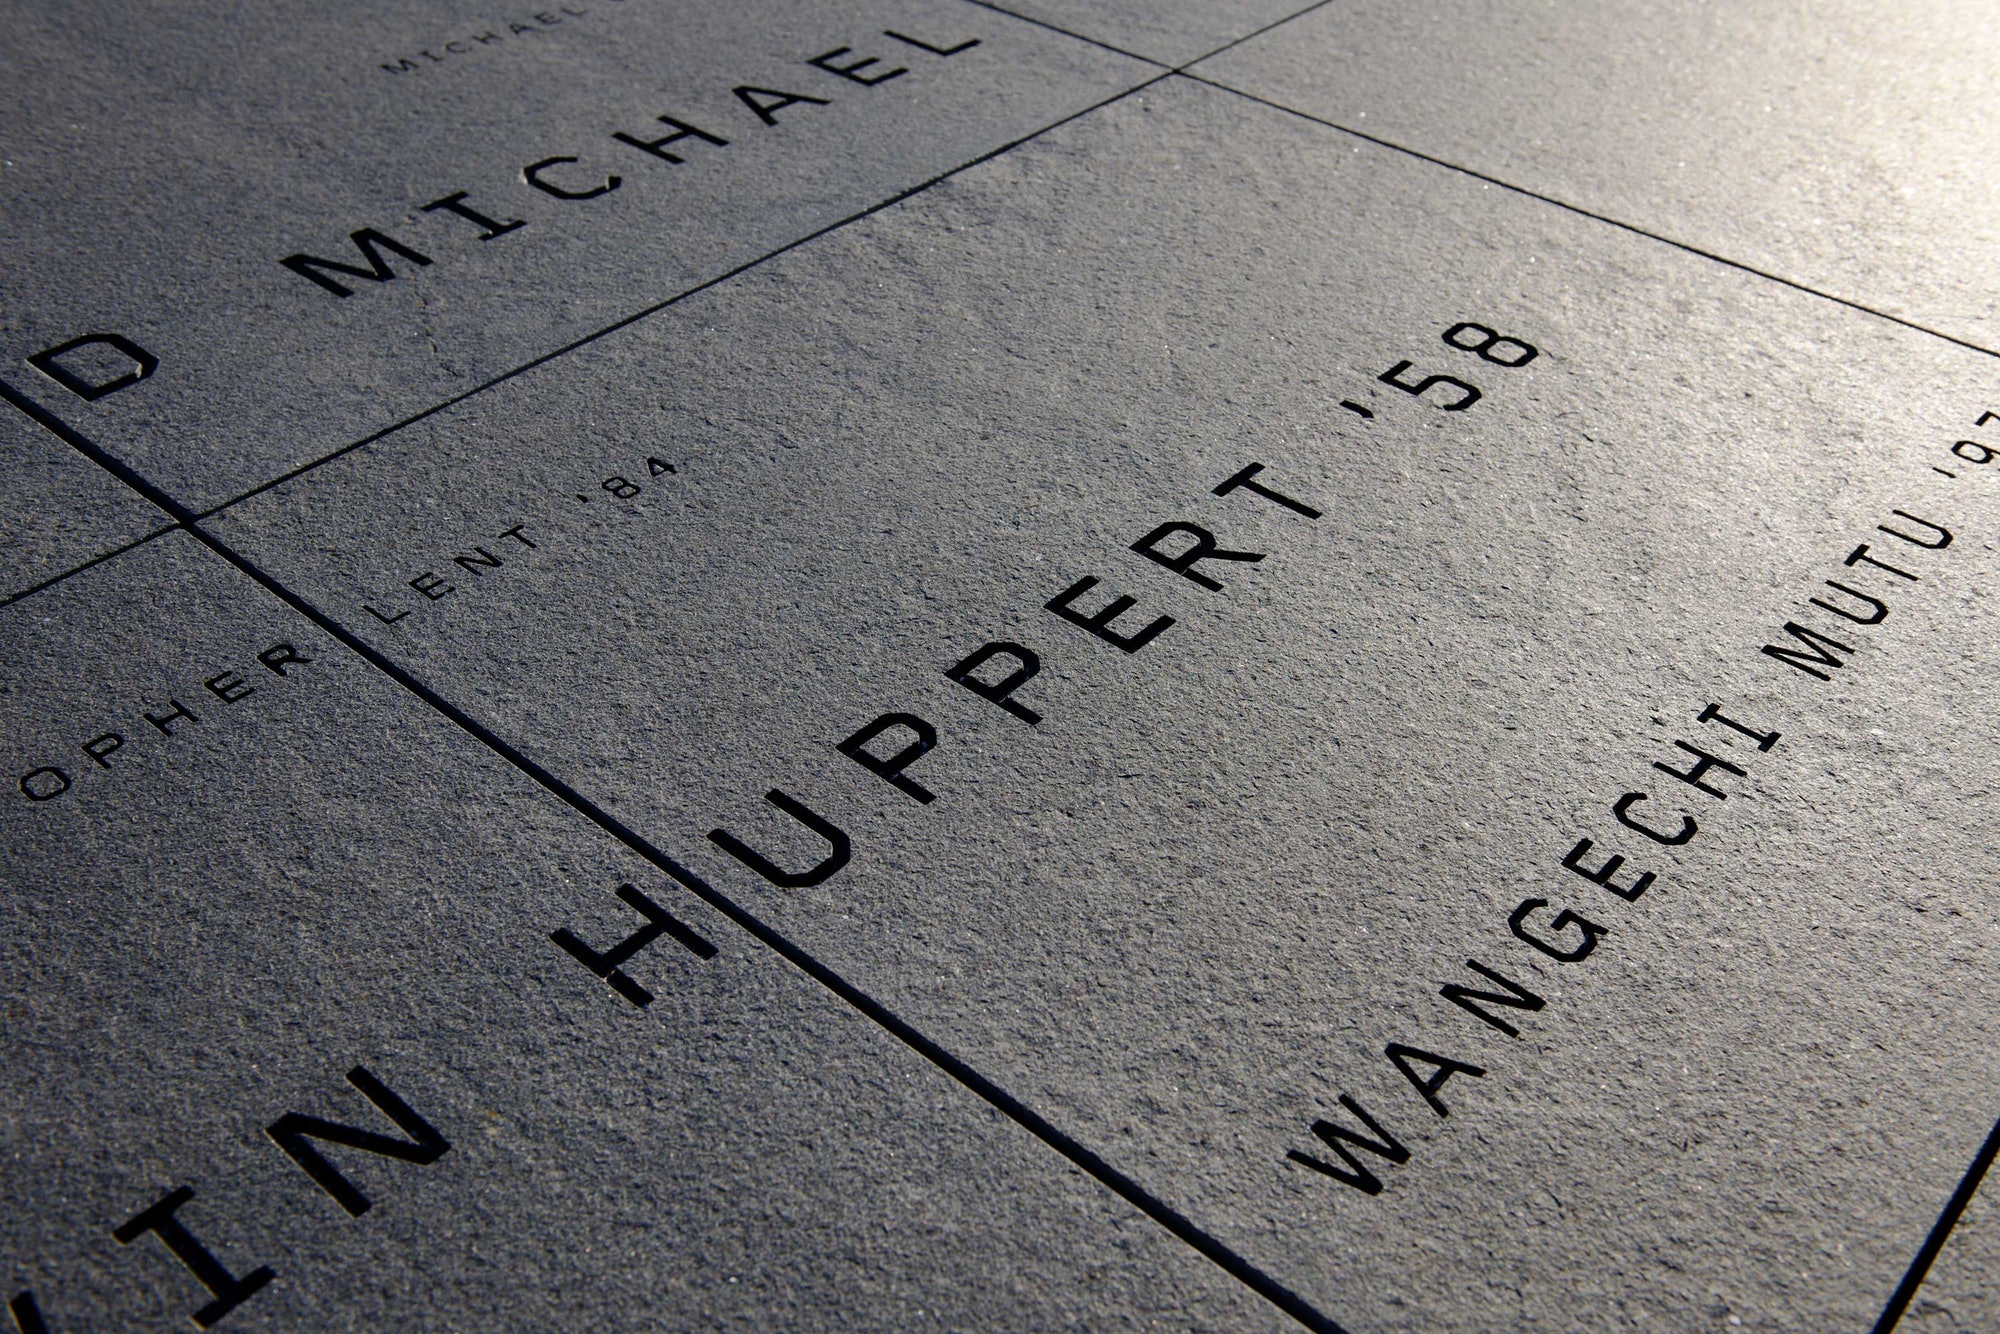 Donor signage on the roof terrace appears as a constellation of names engraved in granite.